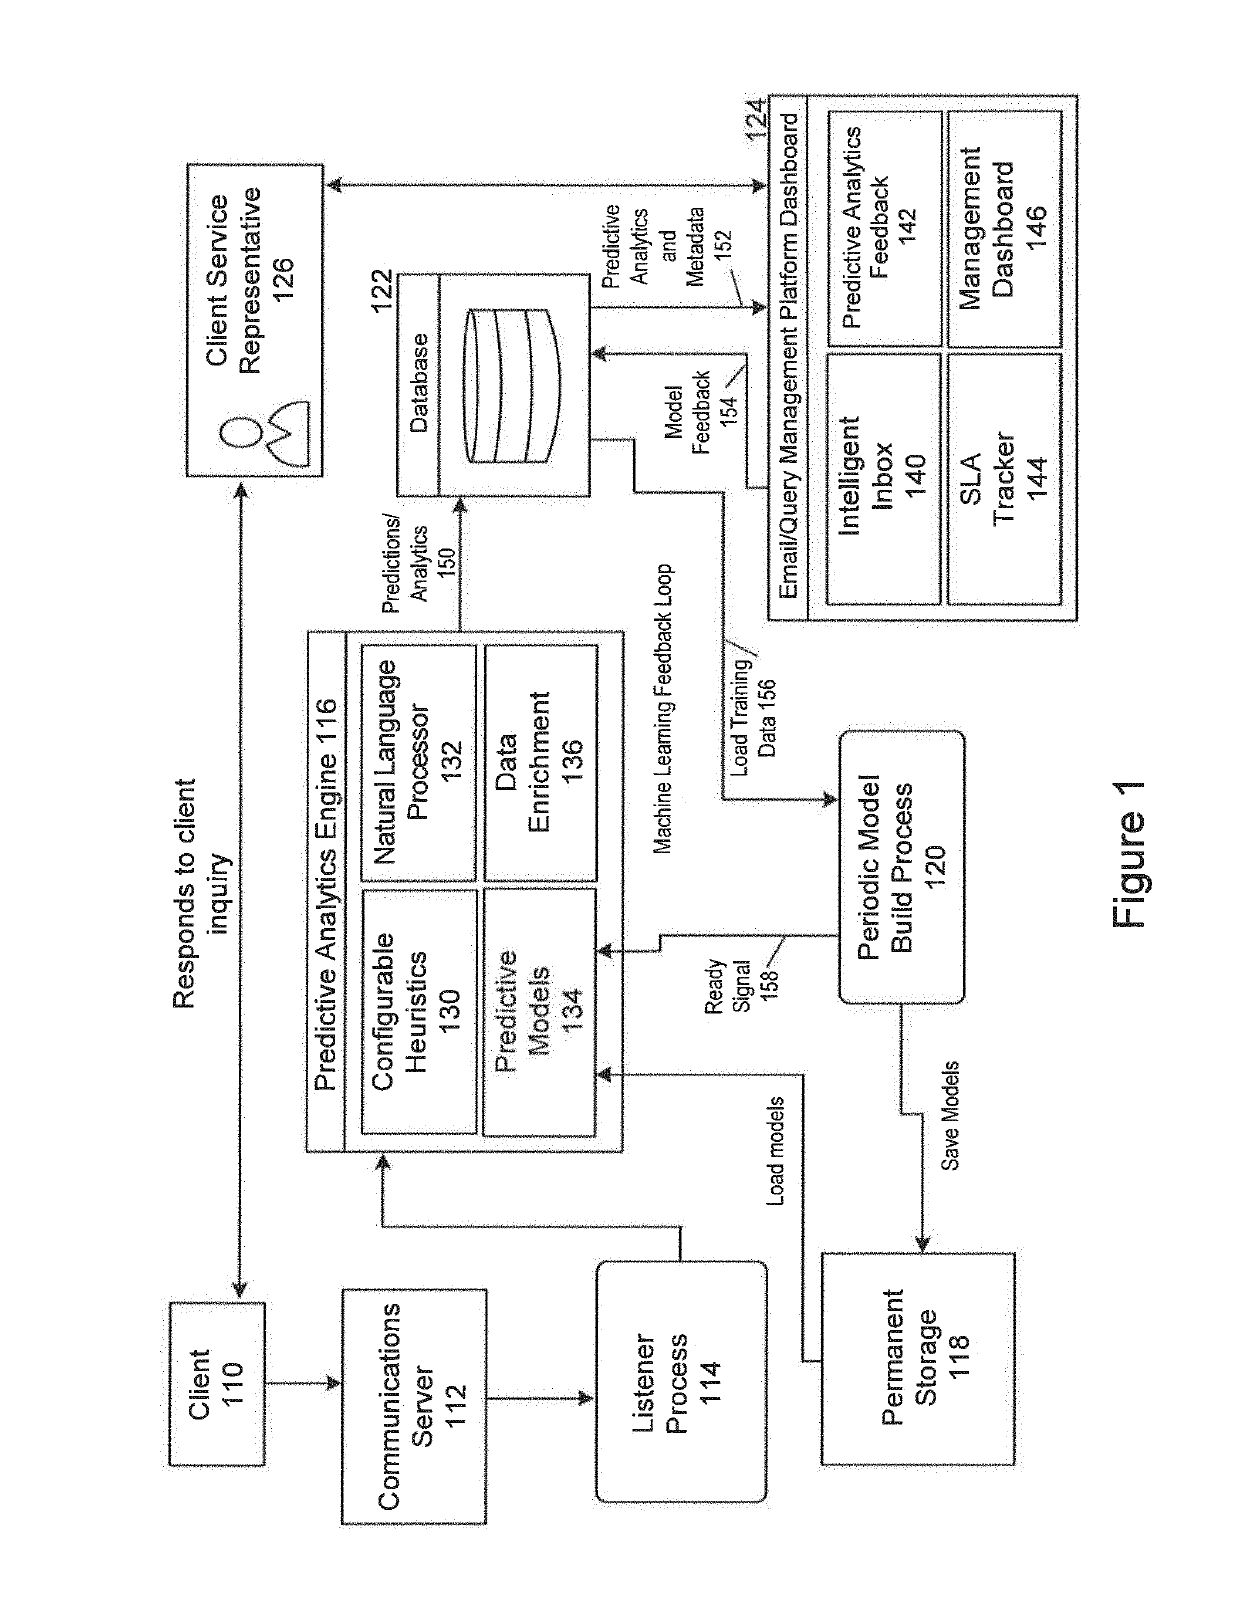 System and method for implementing an intelligent customer service query management and routing system